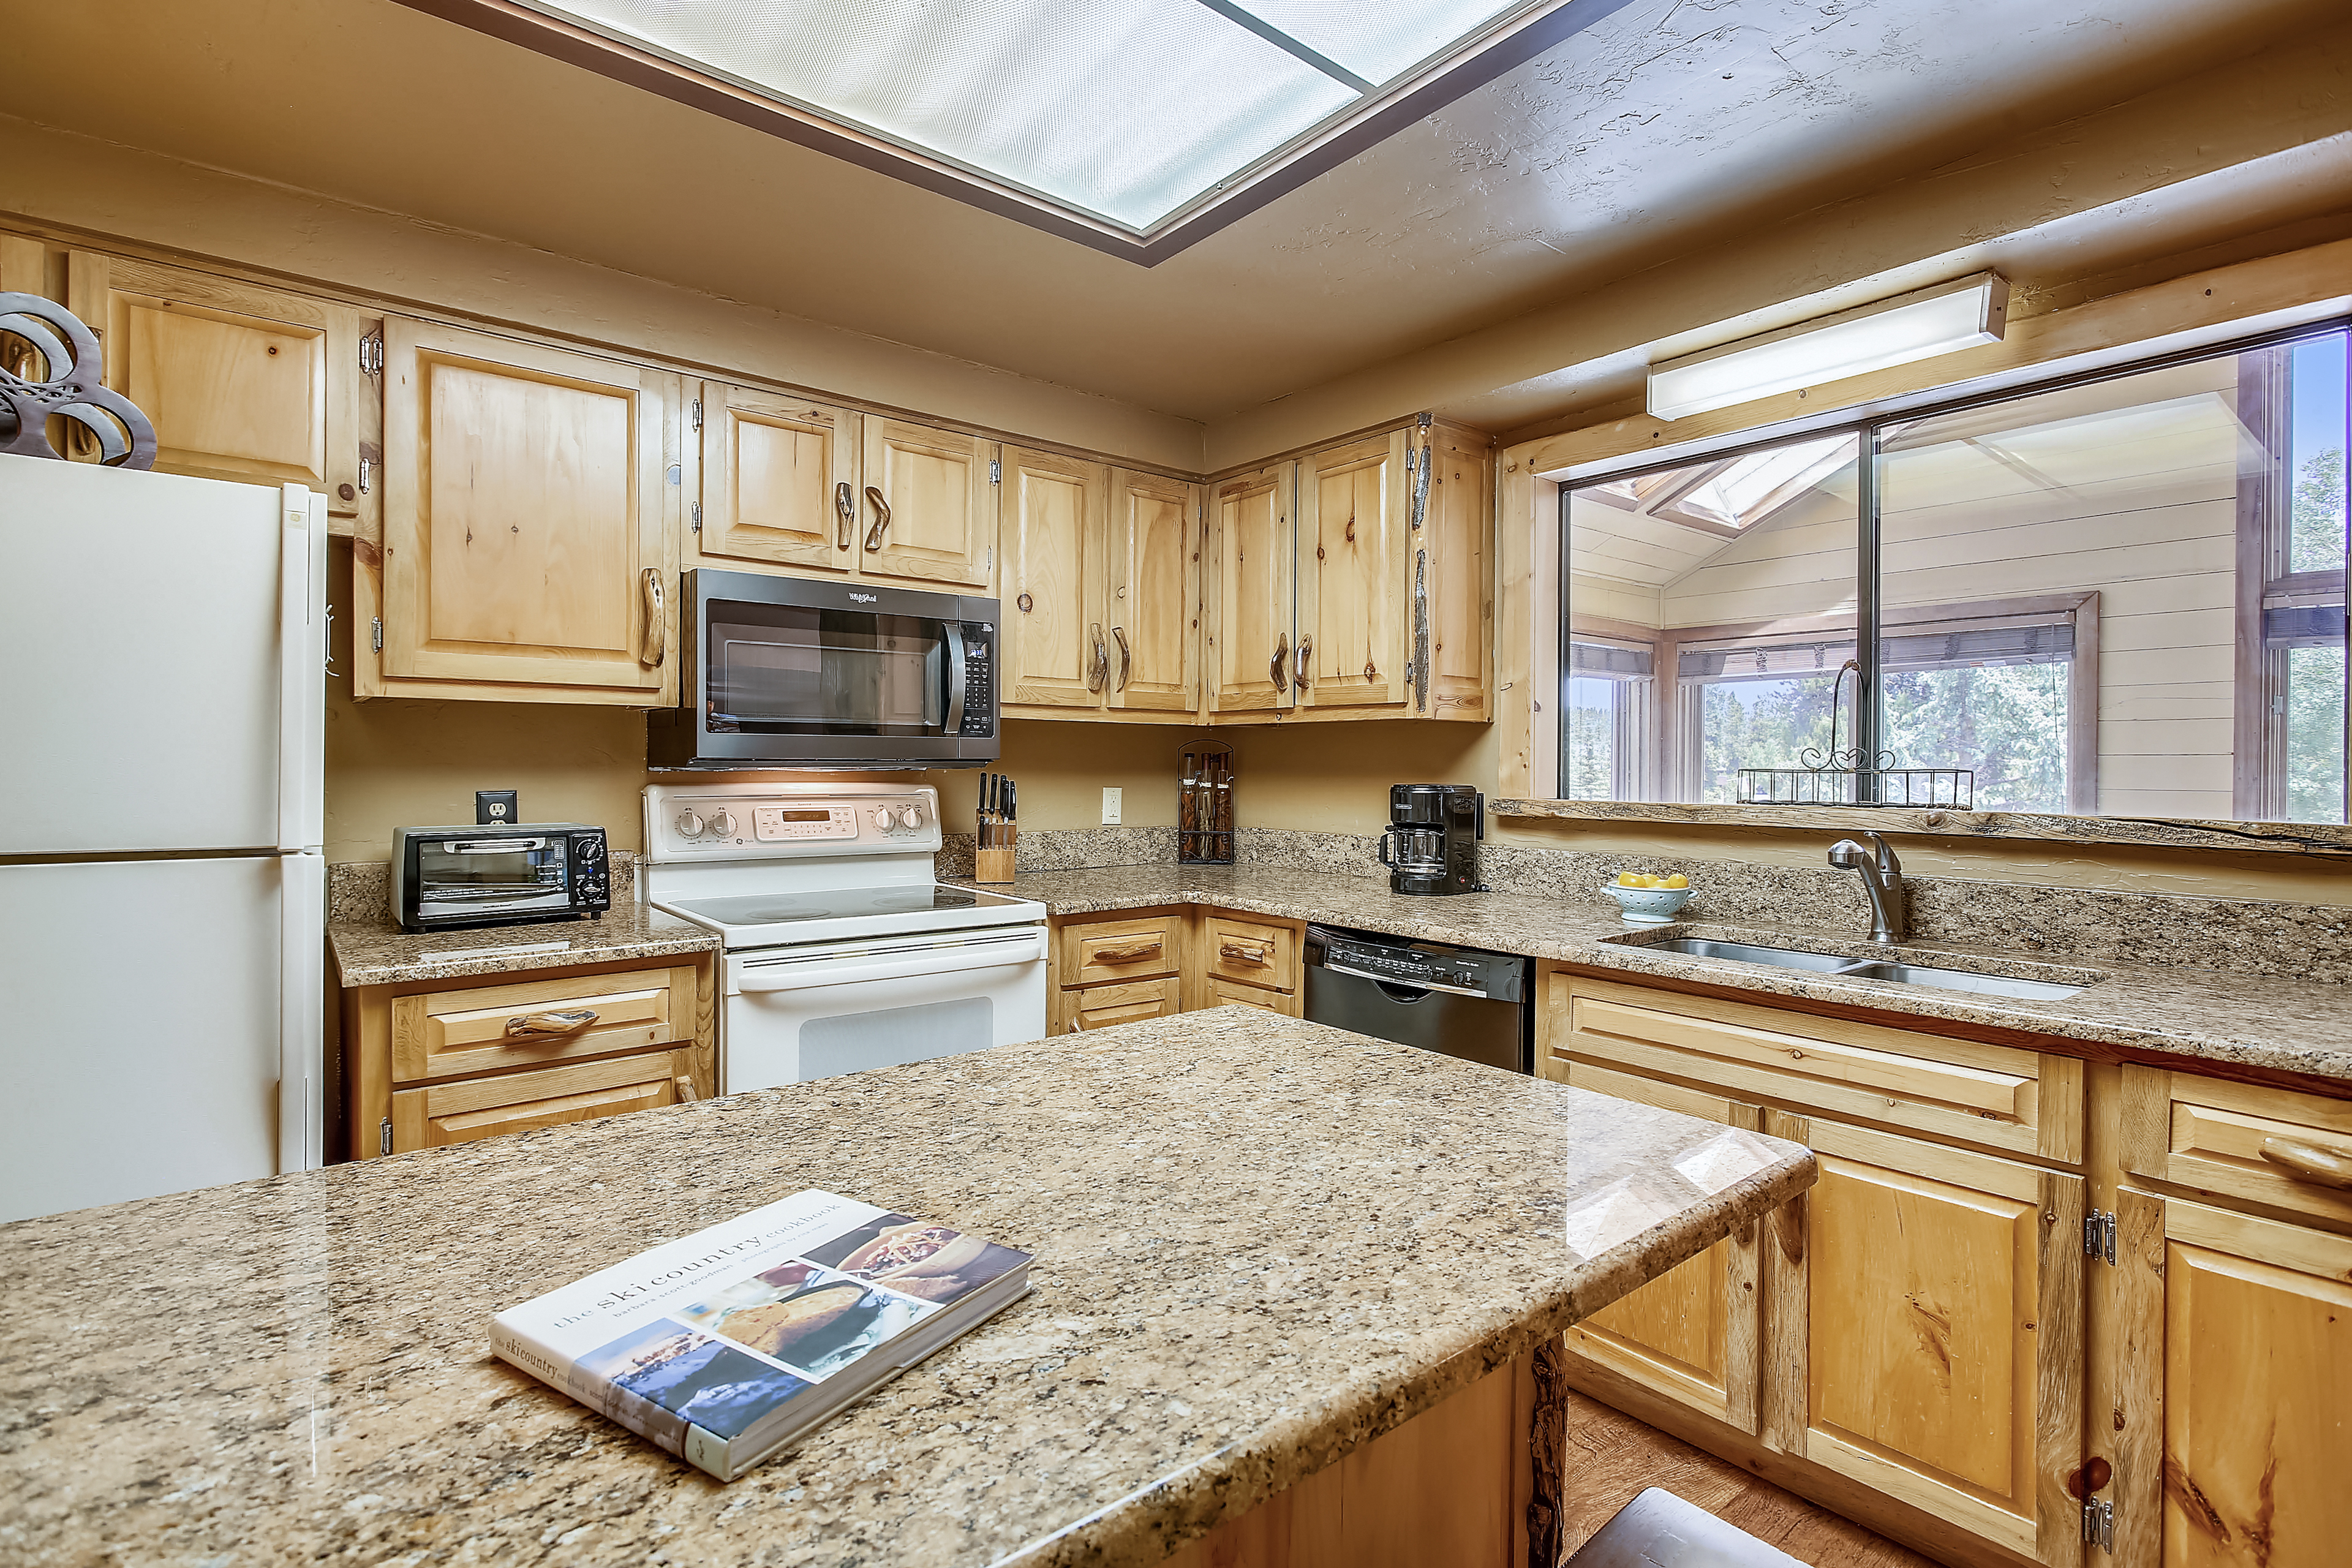 Have a wonderful meal in this open kitchen - Cedars 53 Breckenridge Vacation Rental